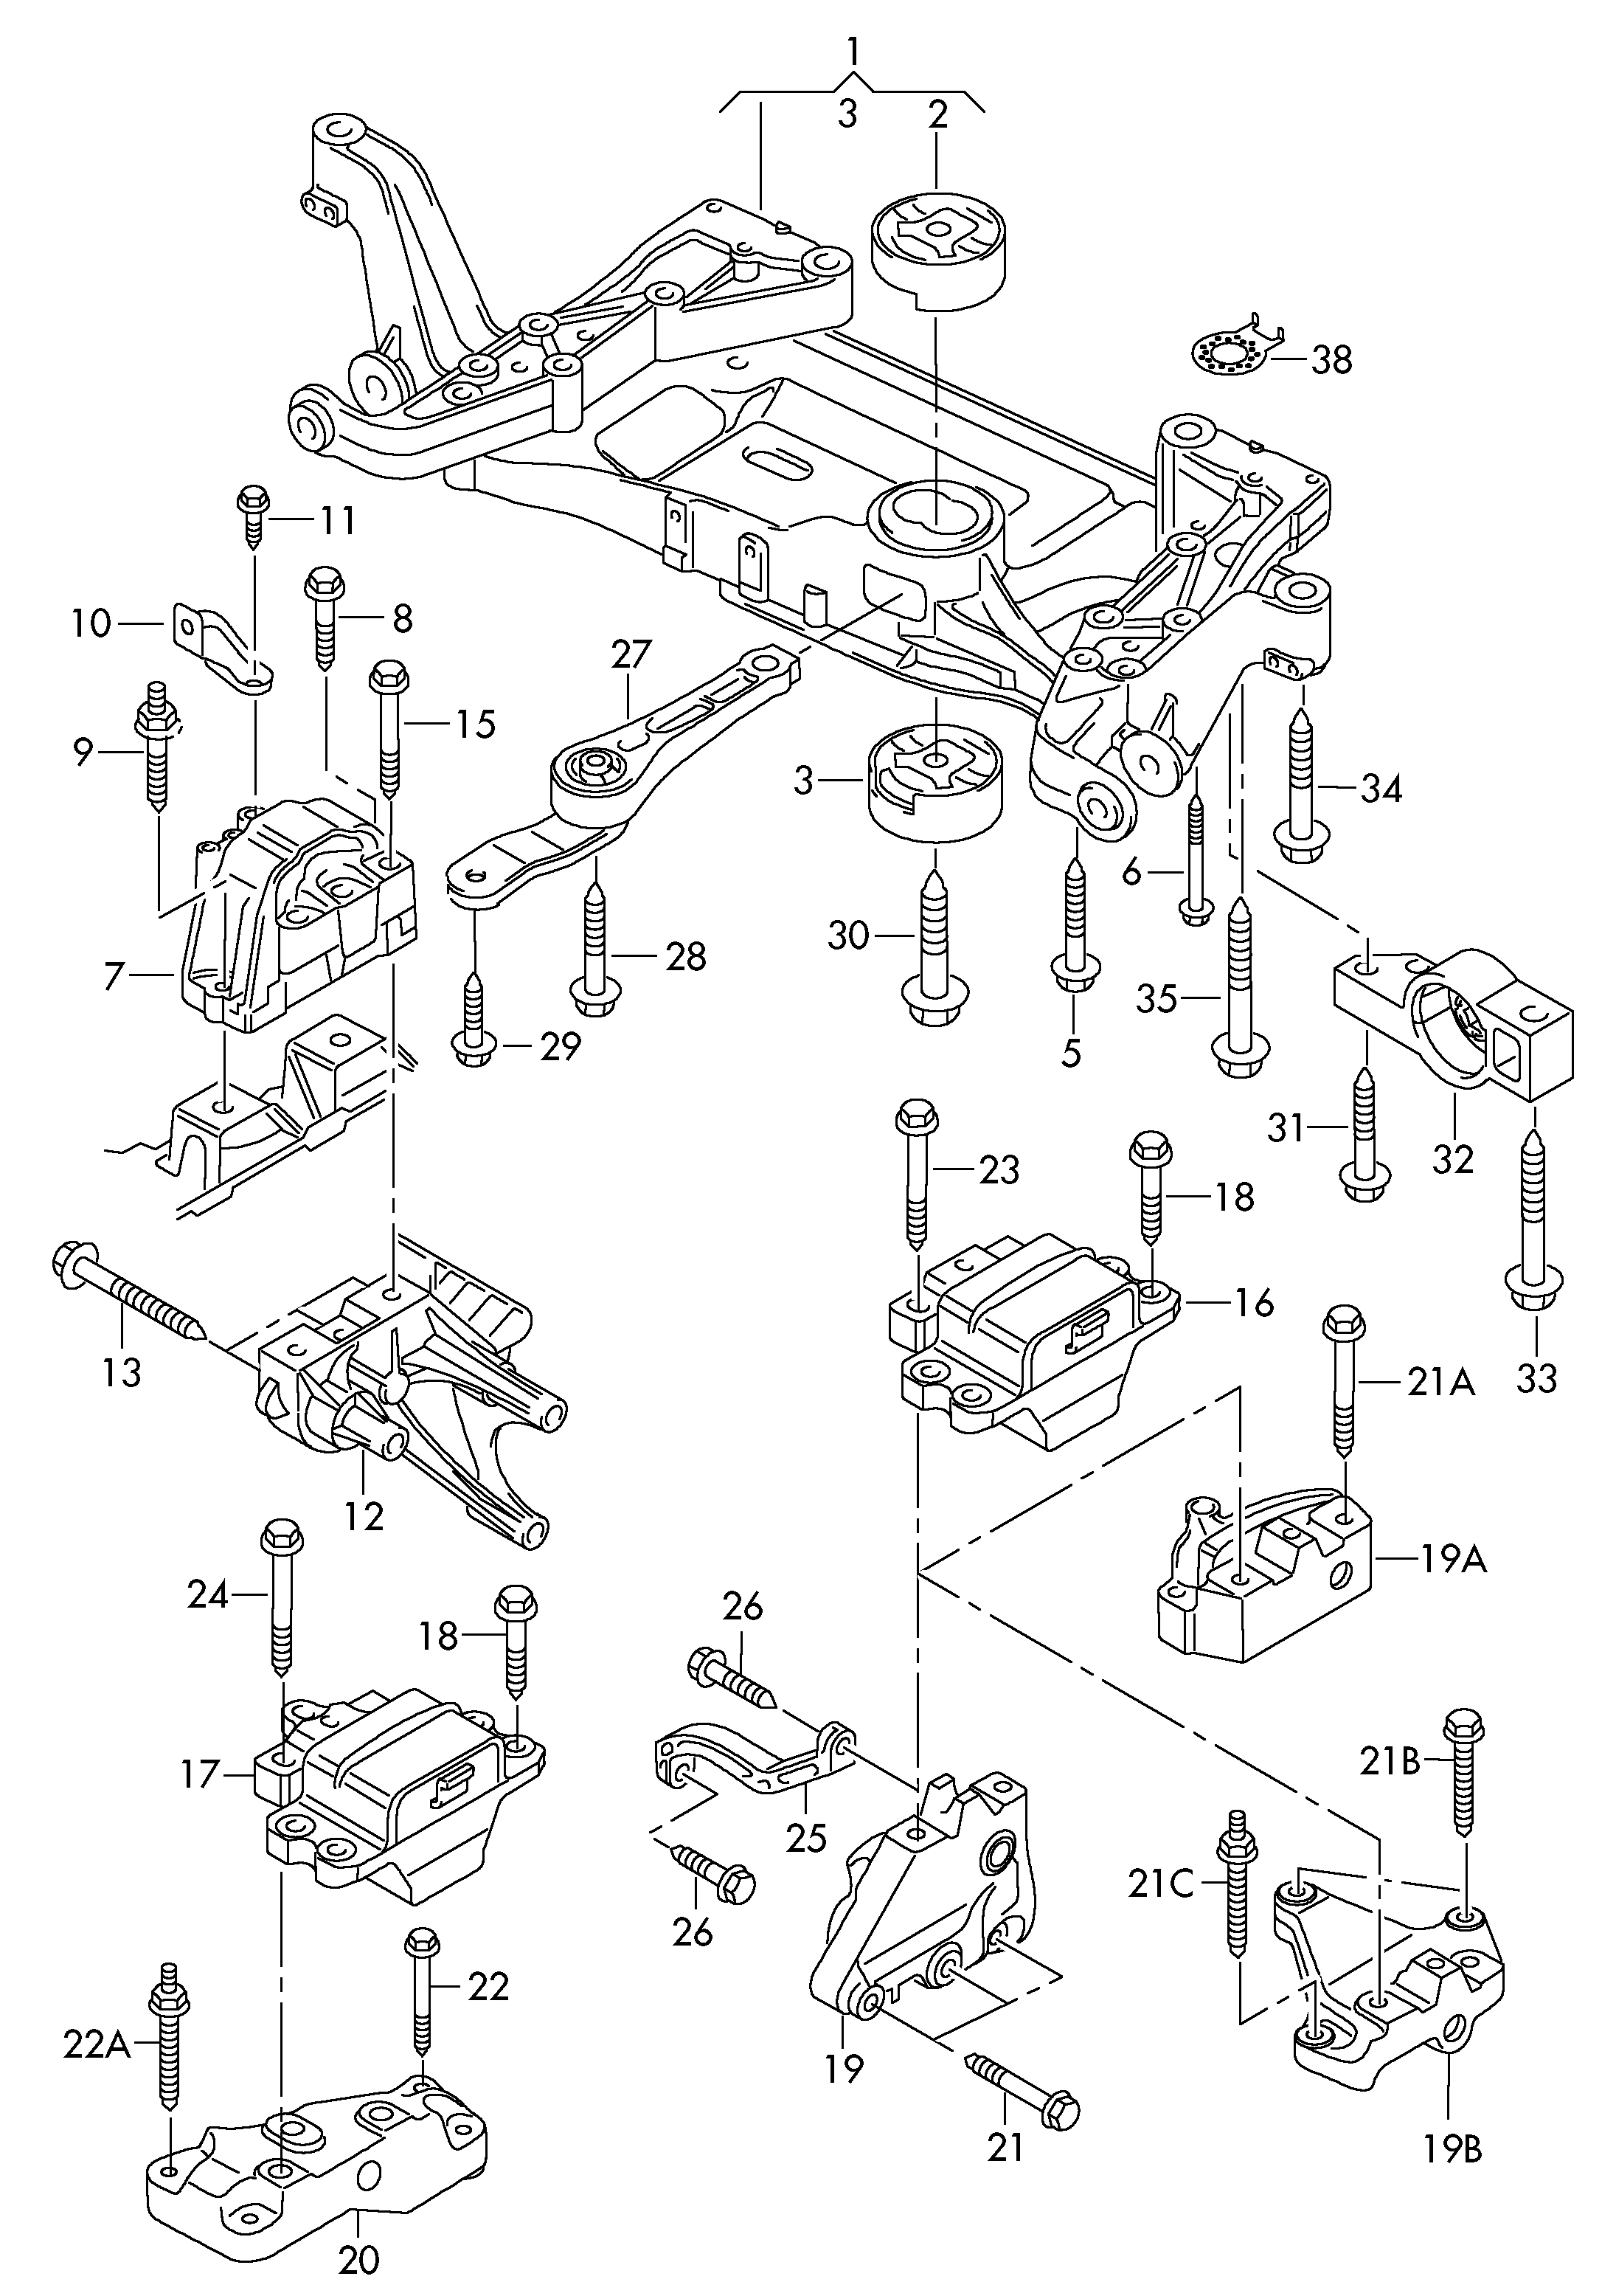 mounting parts for engine and<br>transmission 1.4-2.0 ltr. - CC - cc